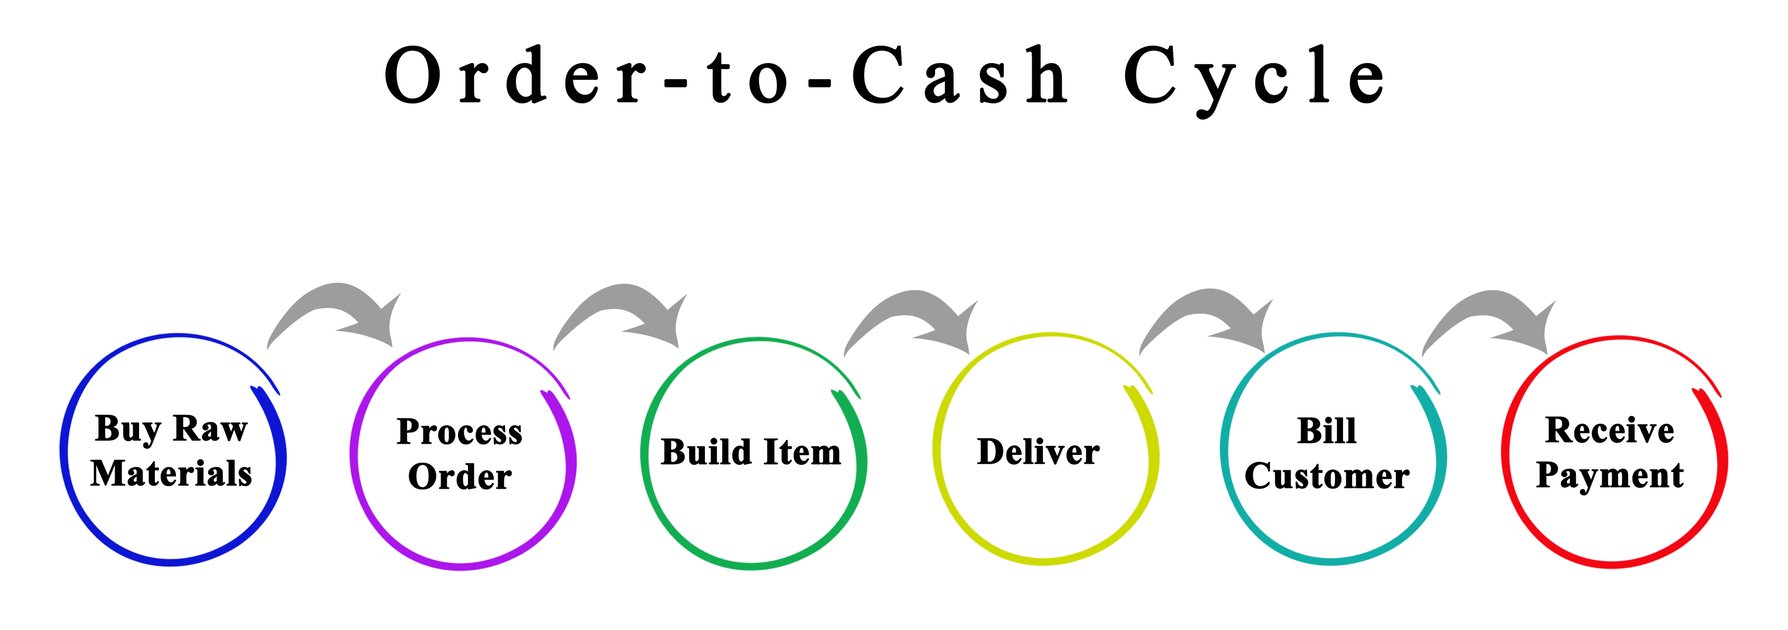 order-to-cash is important to logistics & supply chain